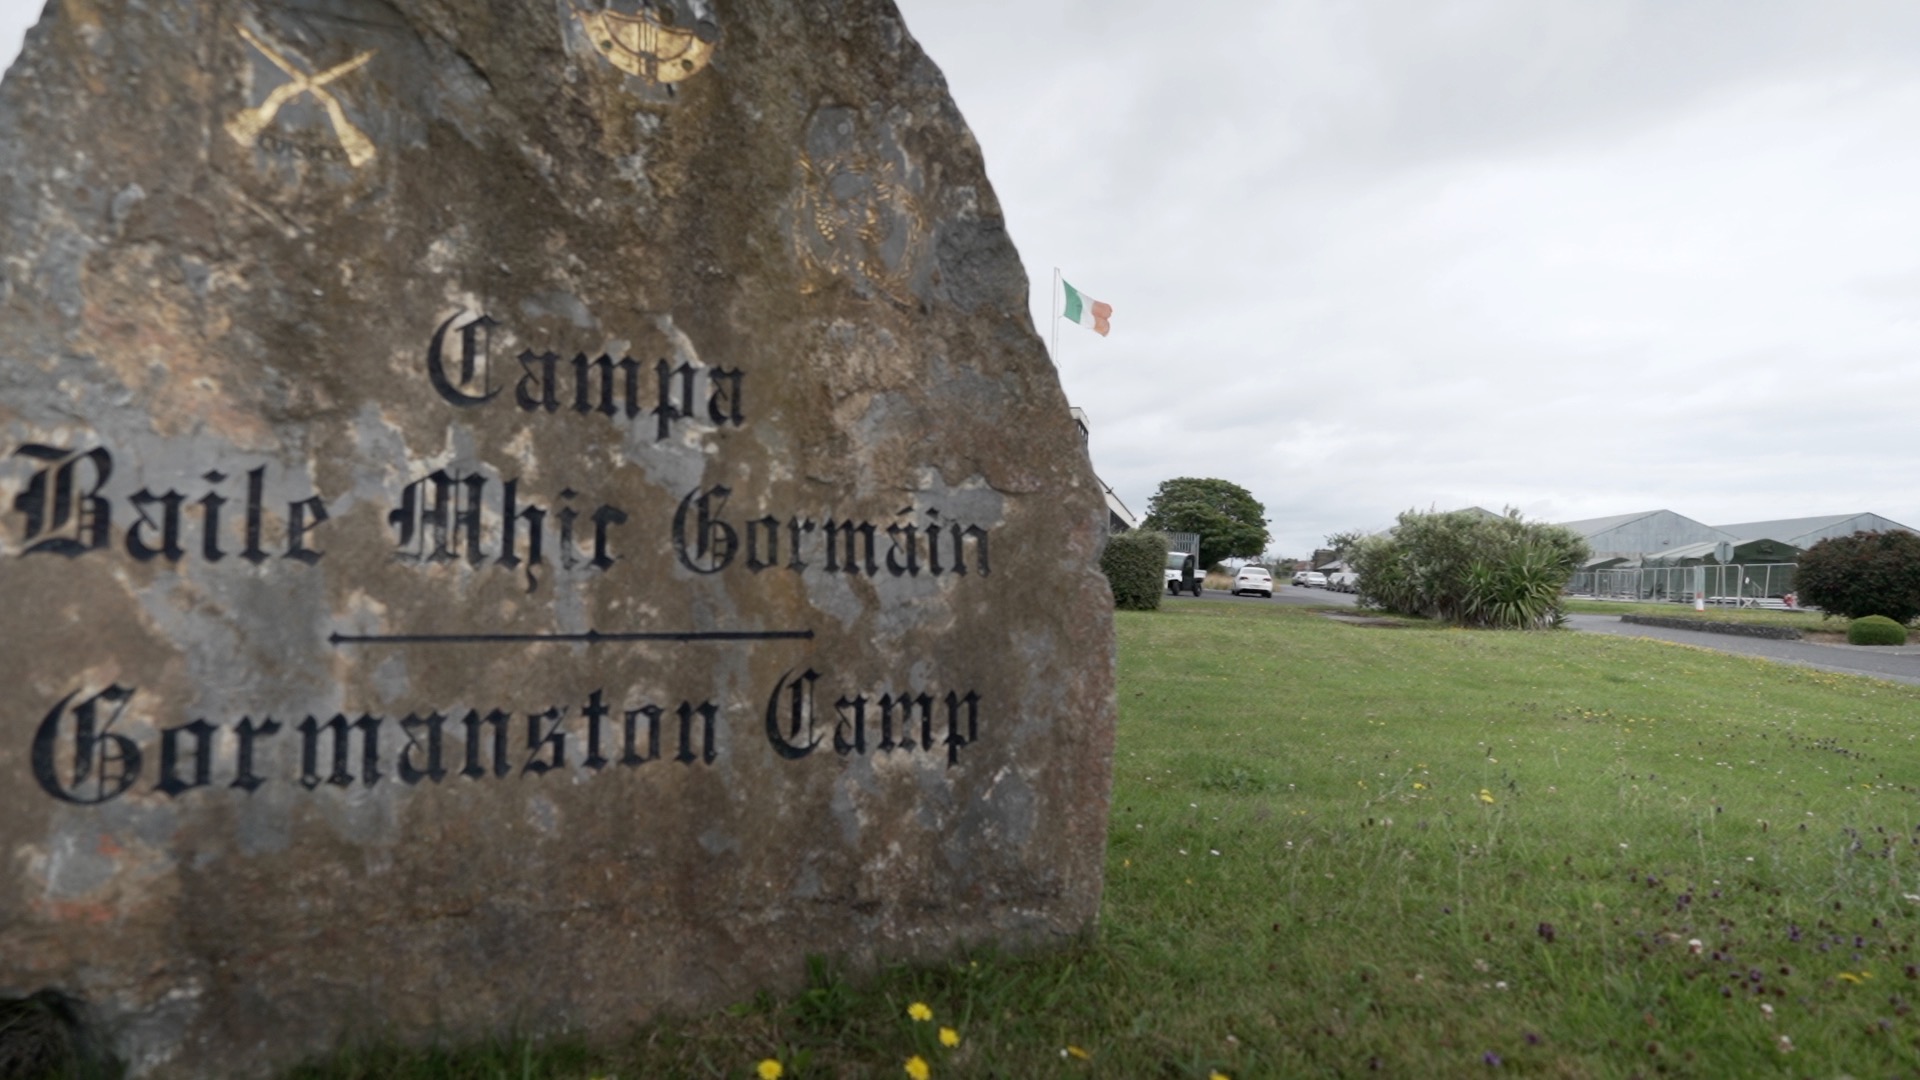 The Gormanston Army Camp. Image: Department of the Taoiseach